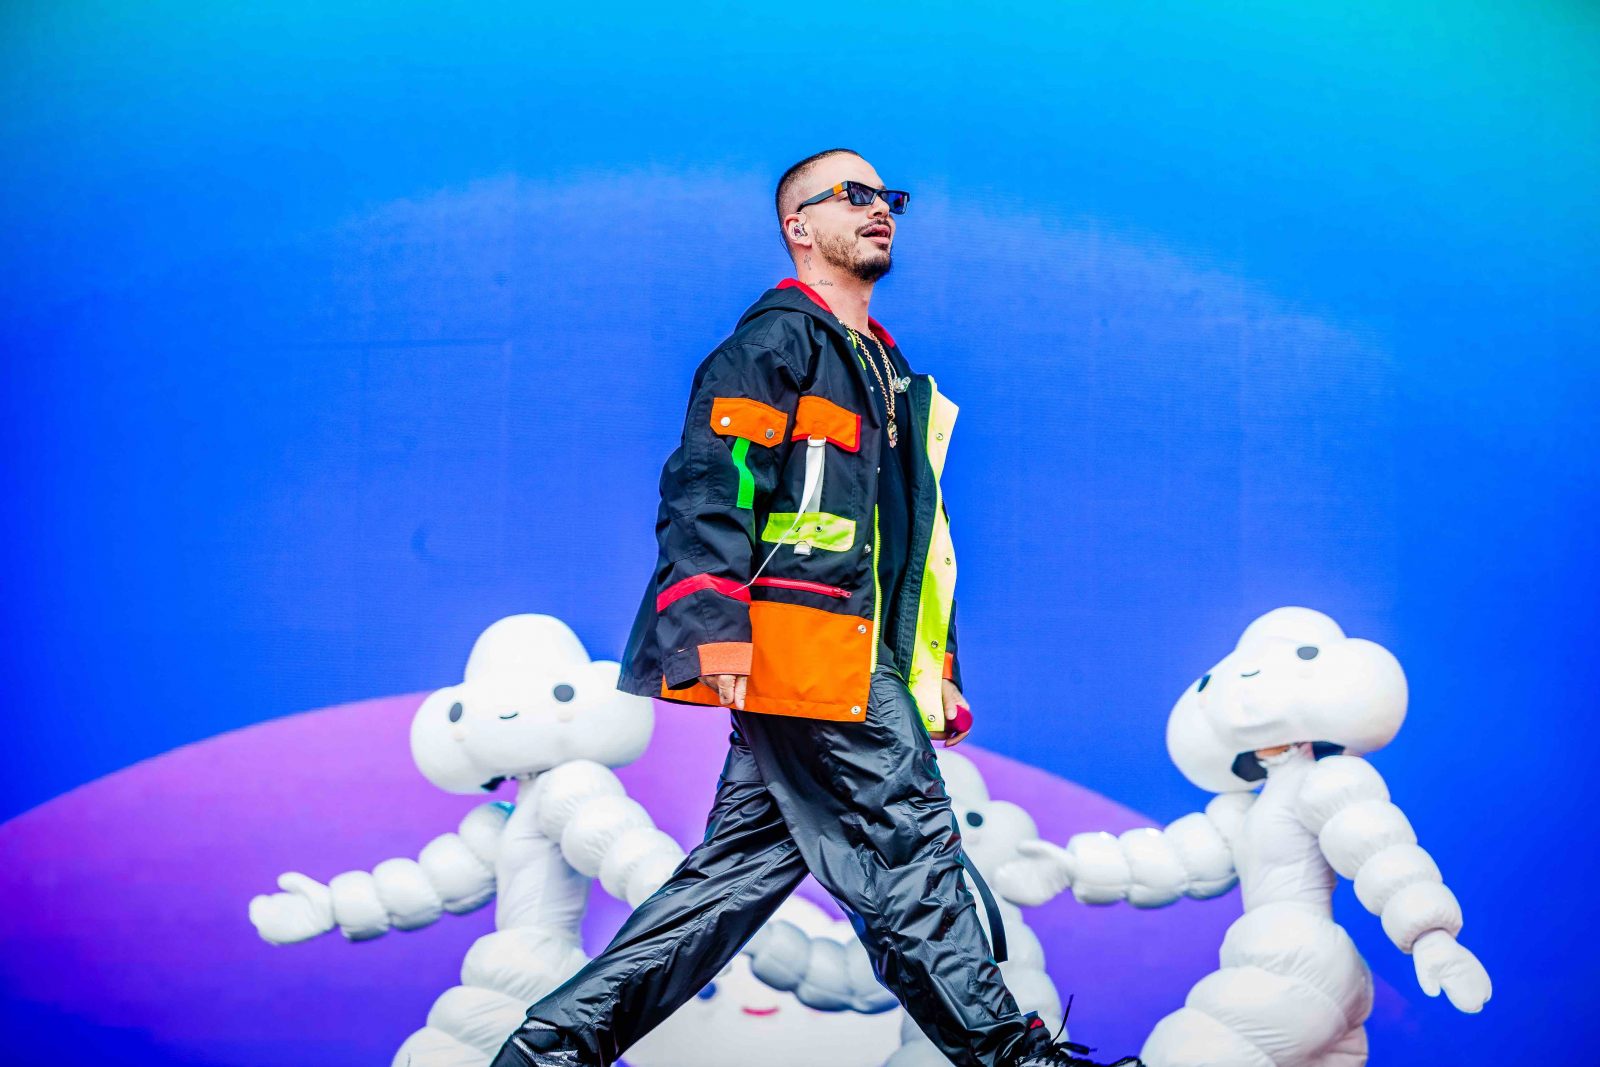 Singer J Balvin Will Take Over the AmericanAirlines Arena This Month